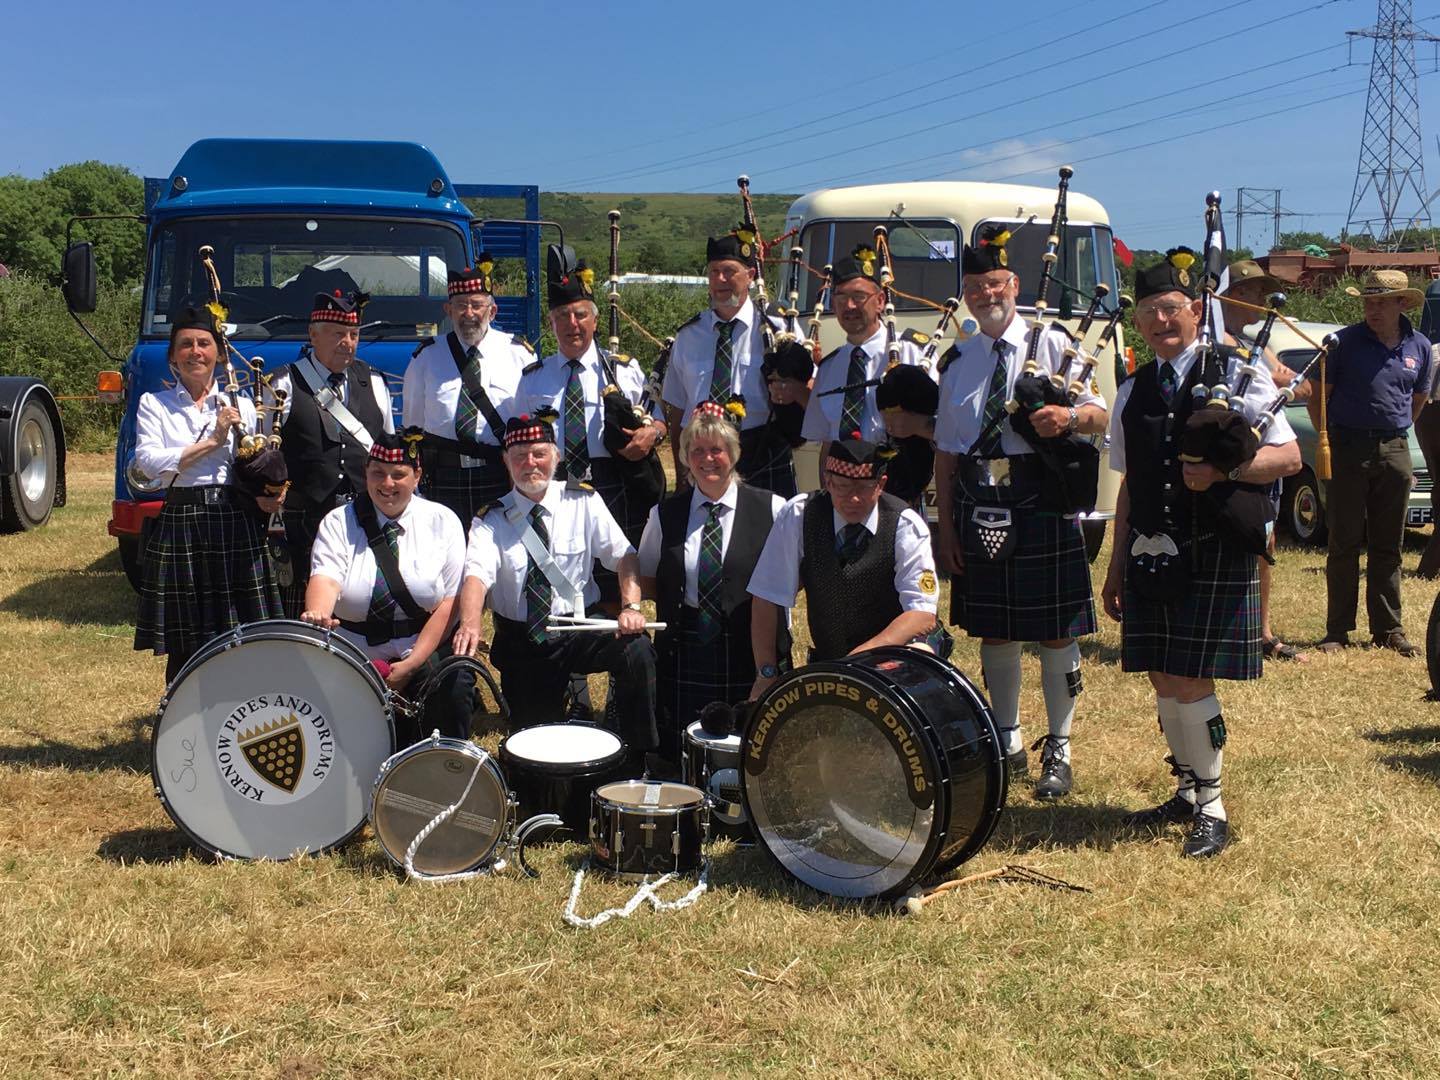 Kernow Pipes & Drums at Vintage Tractor Rally in Fraddon 2017